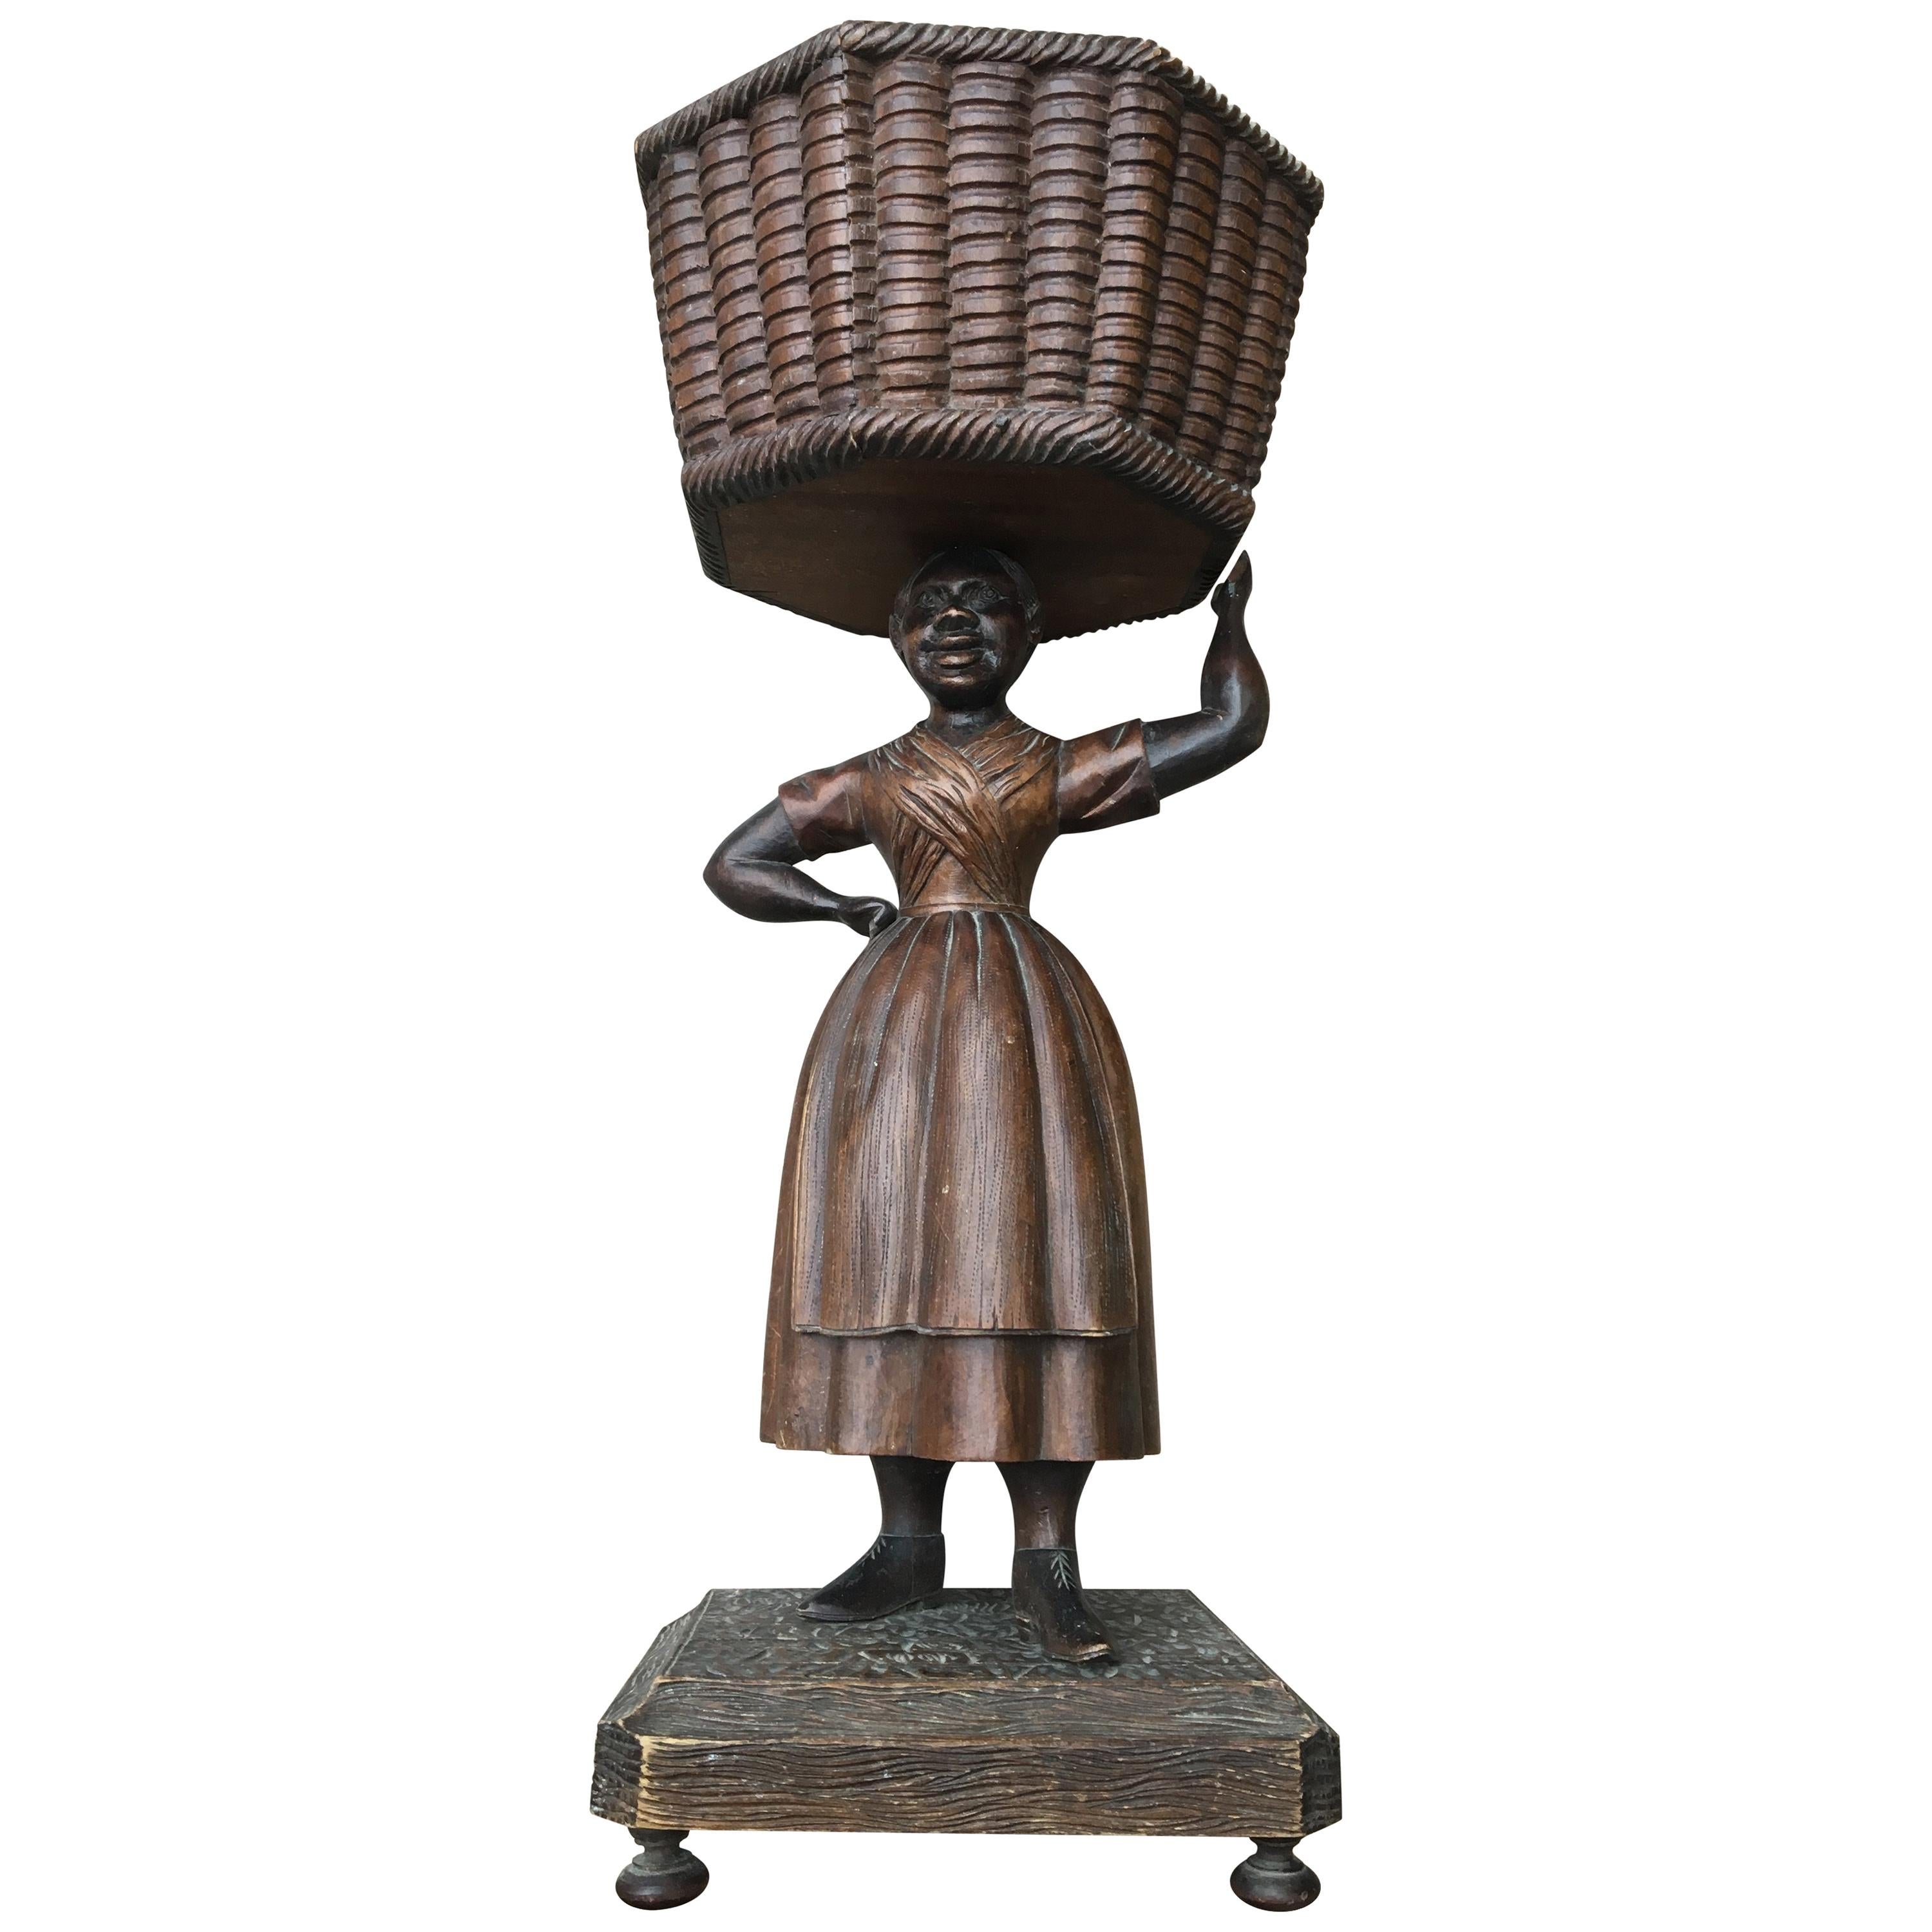 Early Wooden Sculpture Of Basket-Carrying Lady